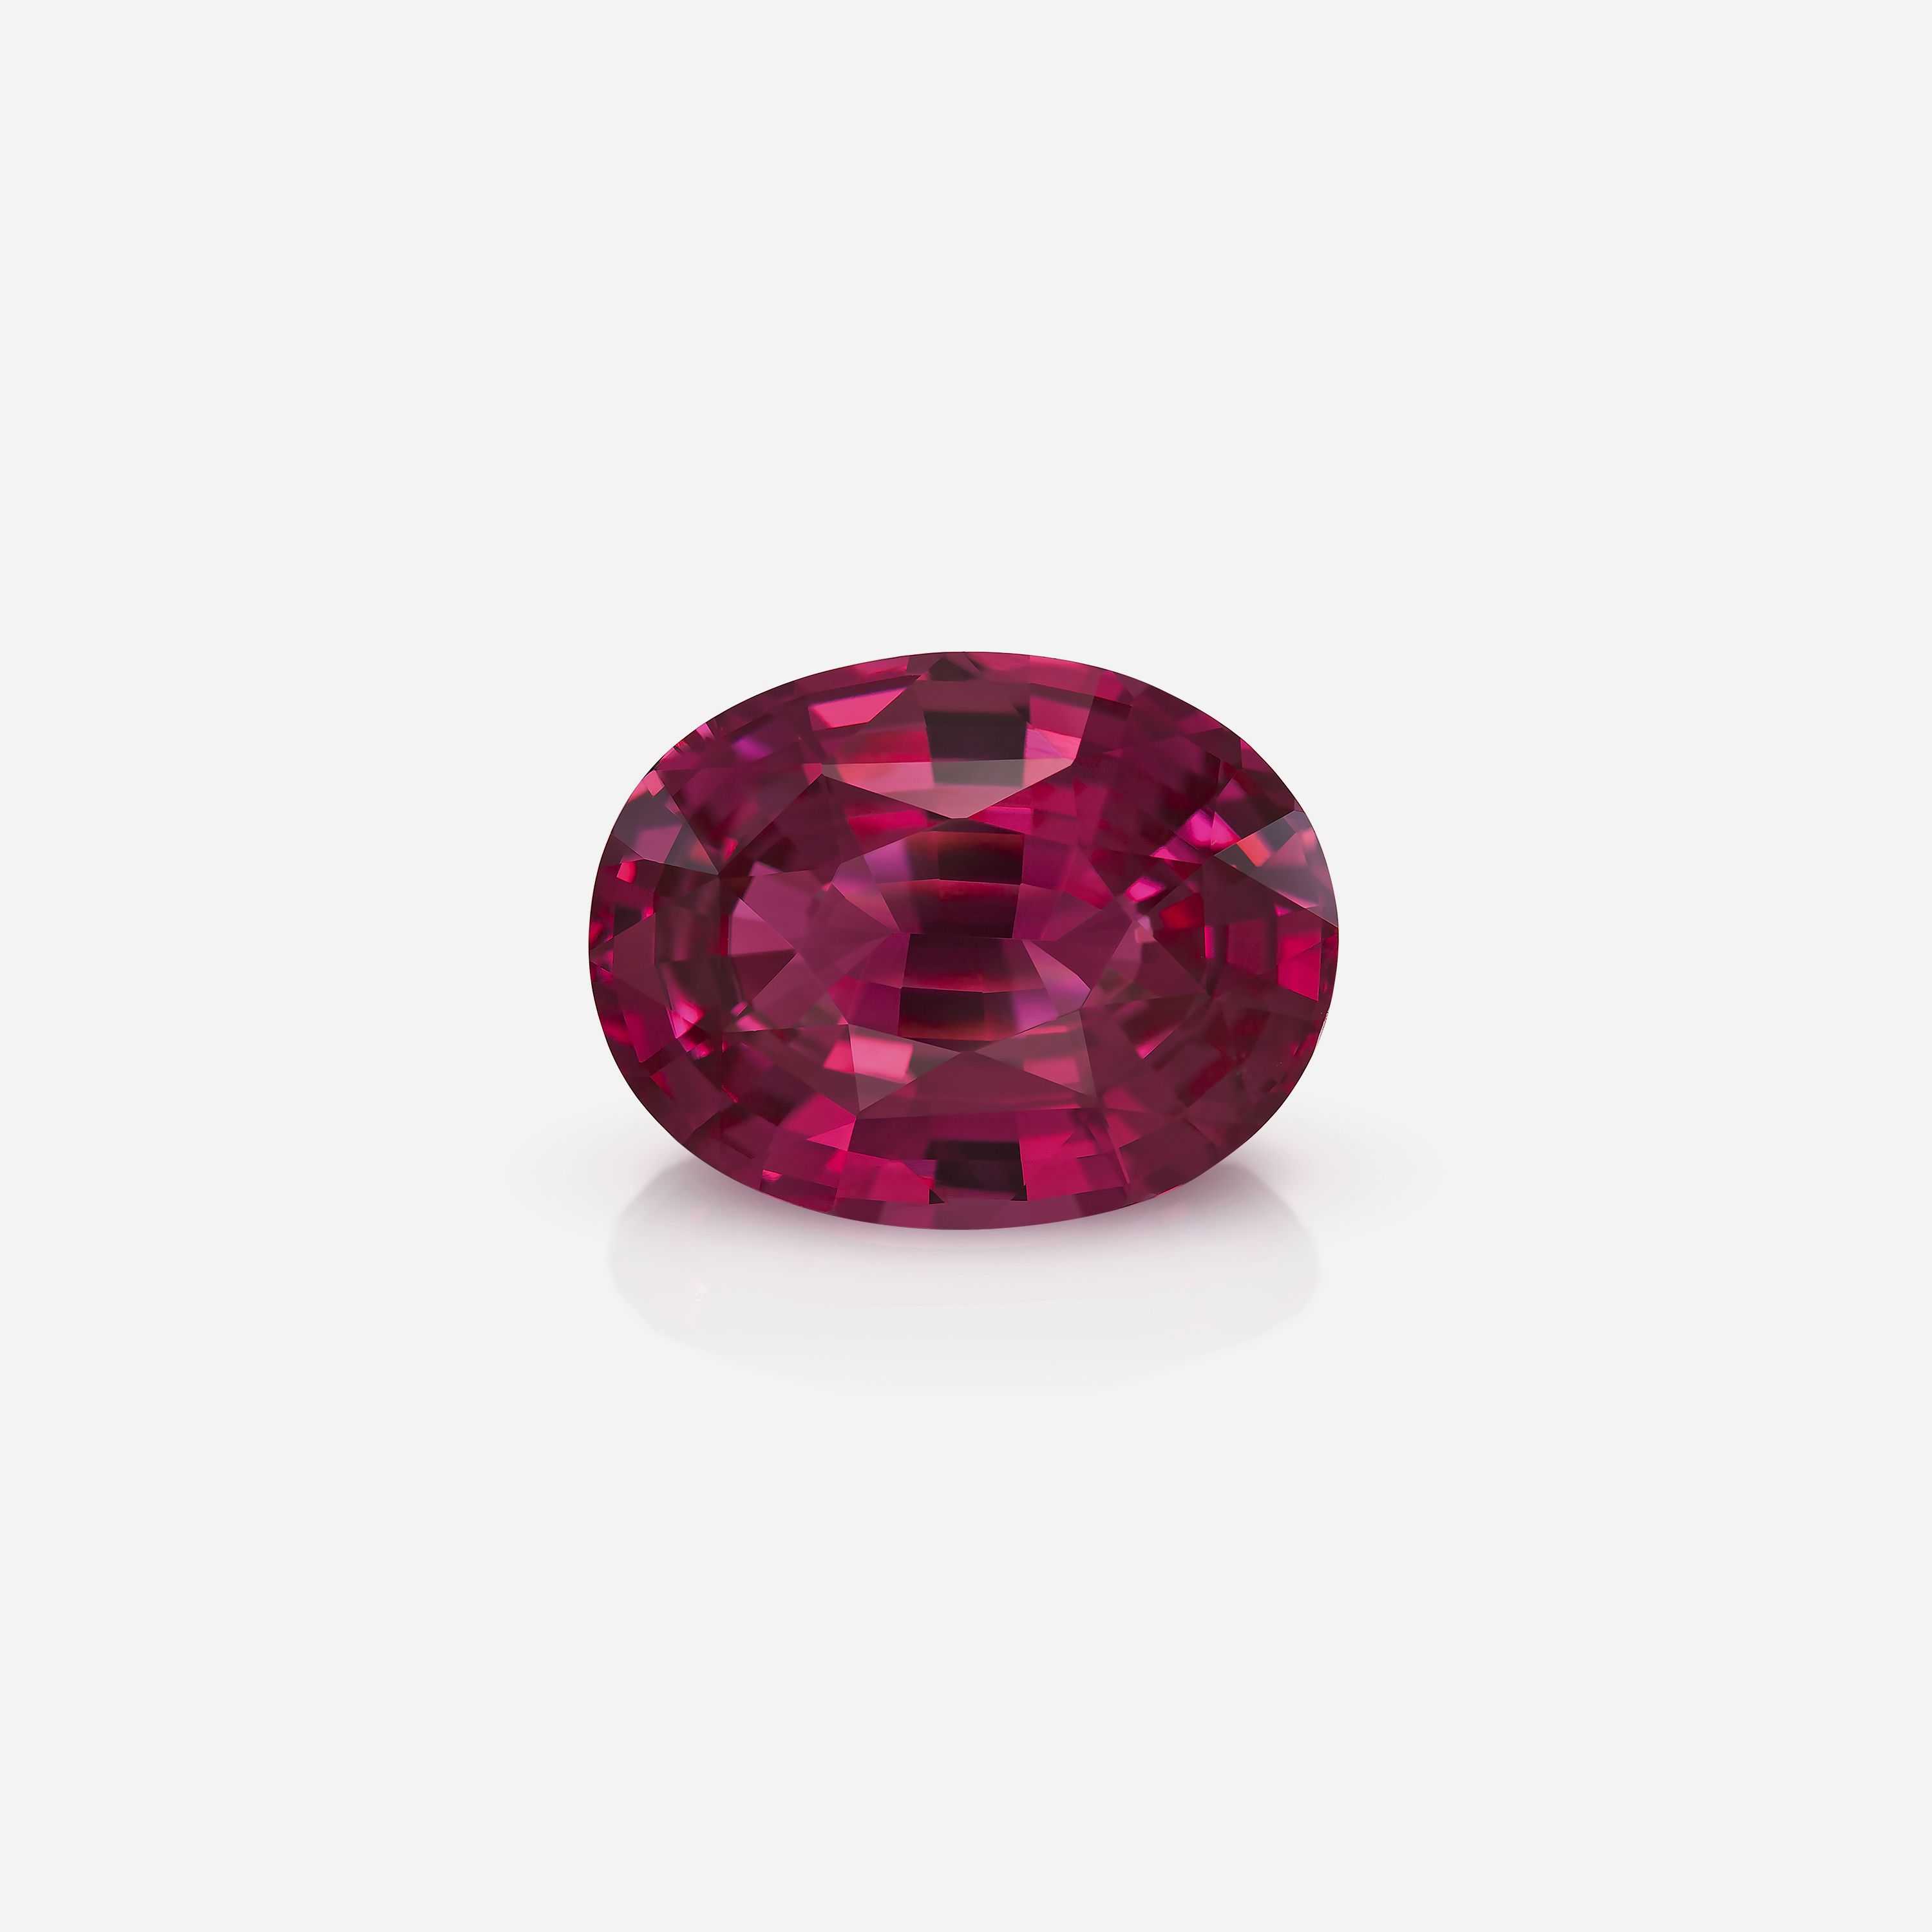 Red Spinel, Tanzania, 31ct